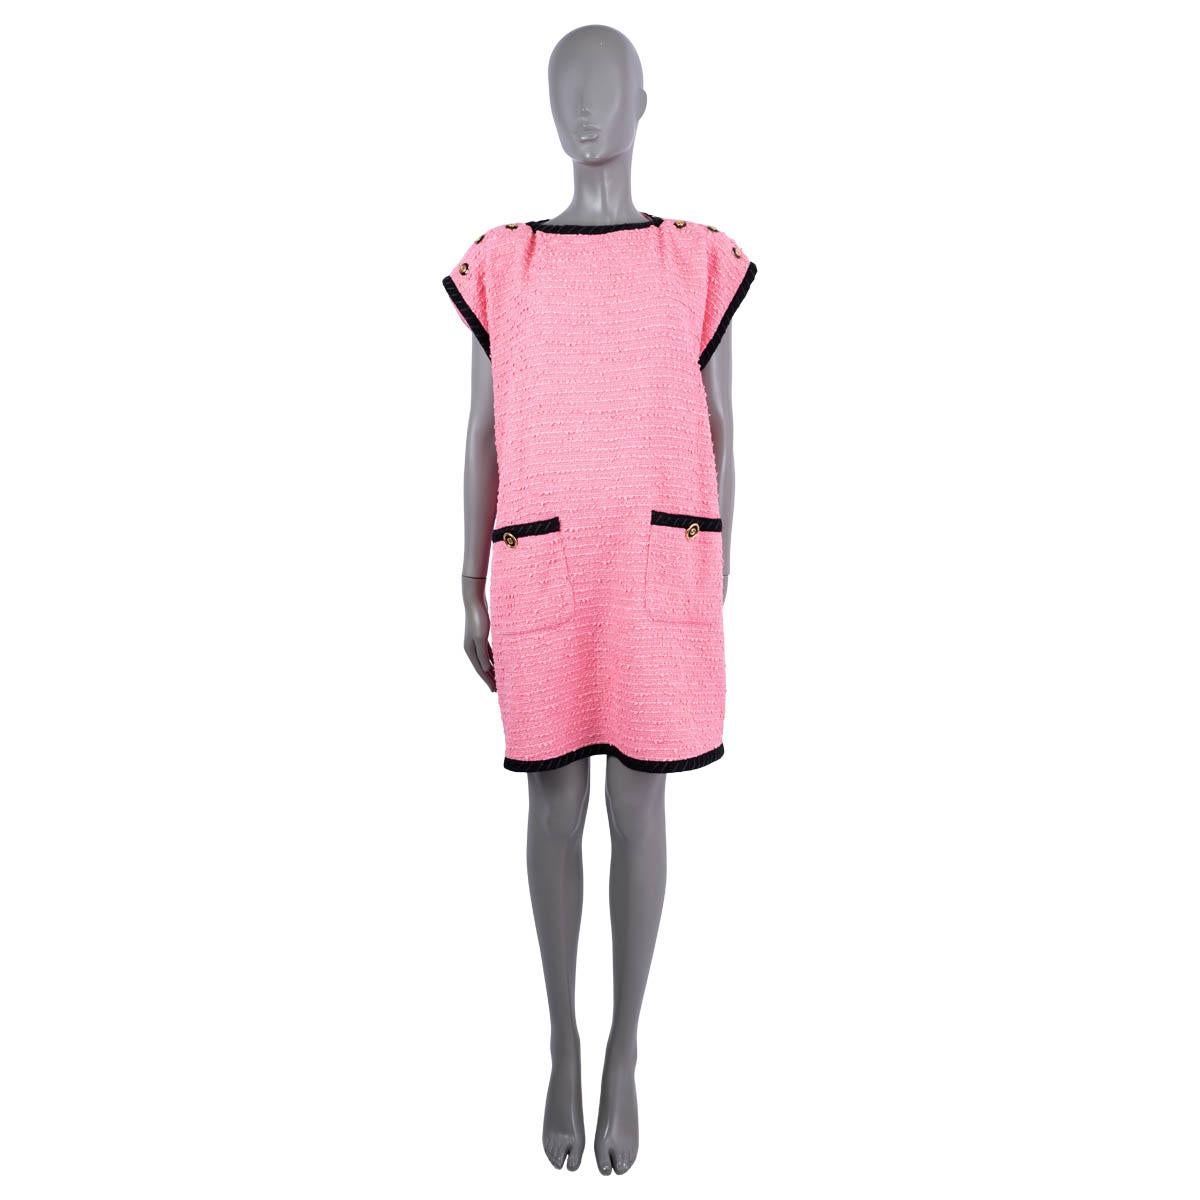 100% authentic Gucci short sleeve shift dress in pink boucle tweed cotton (80%), polyamide (13%) and viscose (7%). Features a boat neck, black trims, cap sleeves and two buttoned front pockets and buttons on the neck. Closes with a concealed zipper